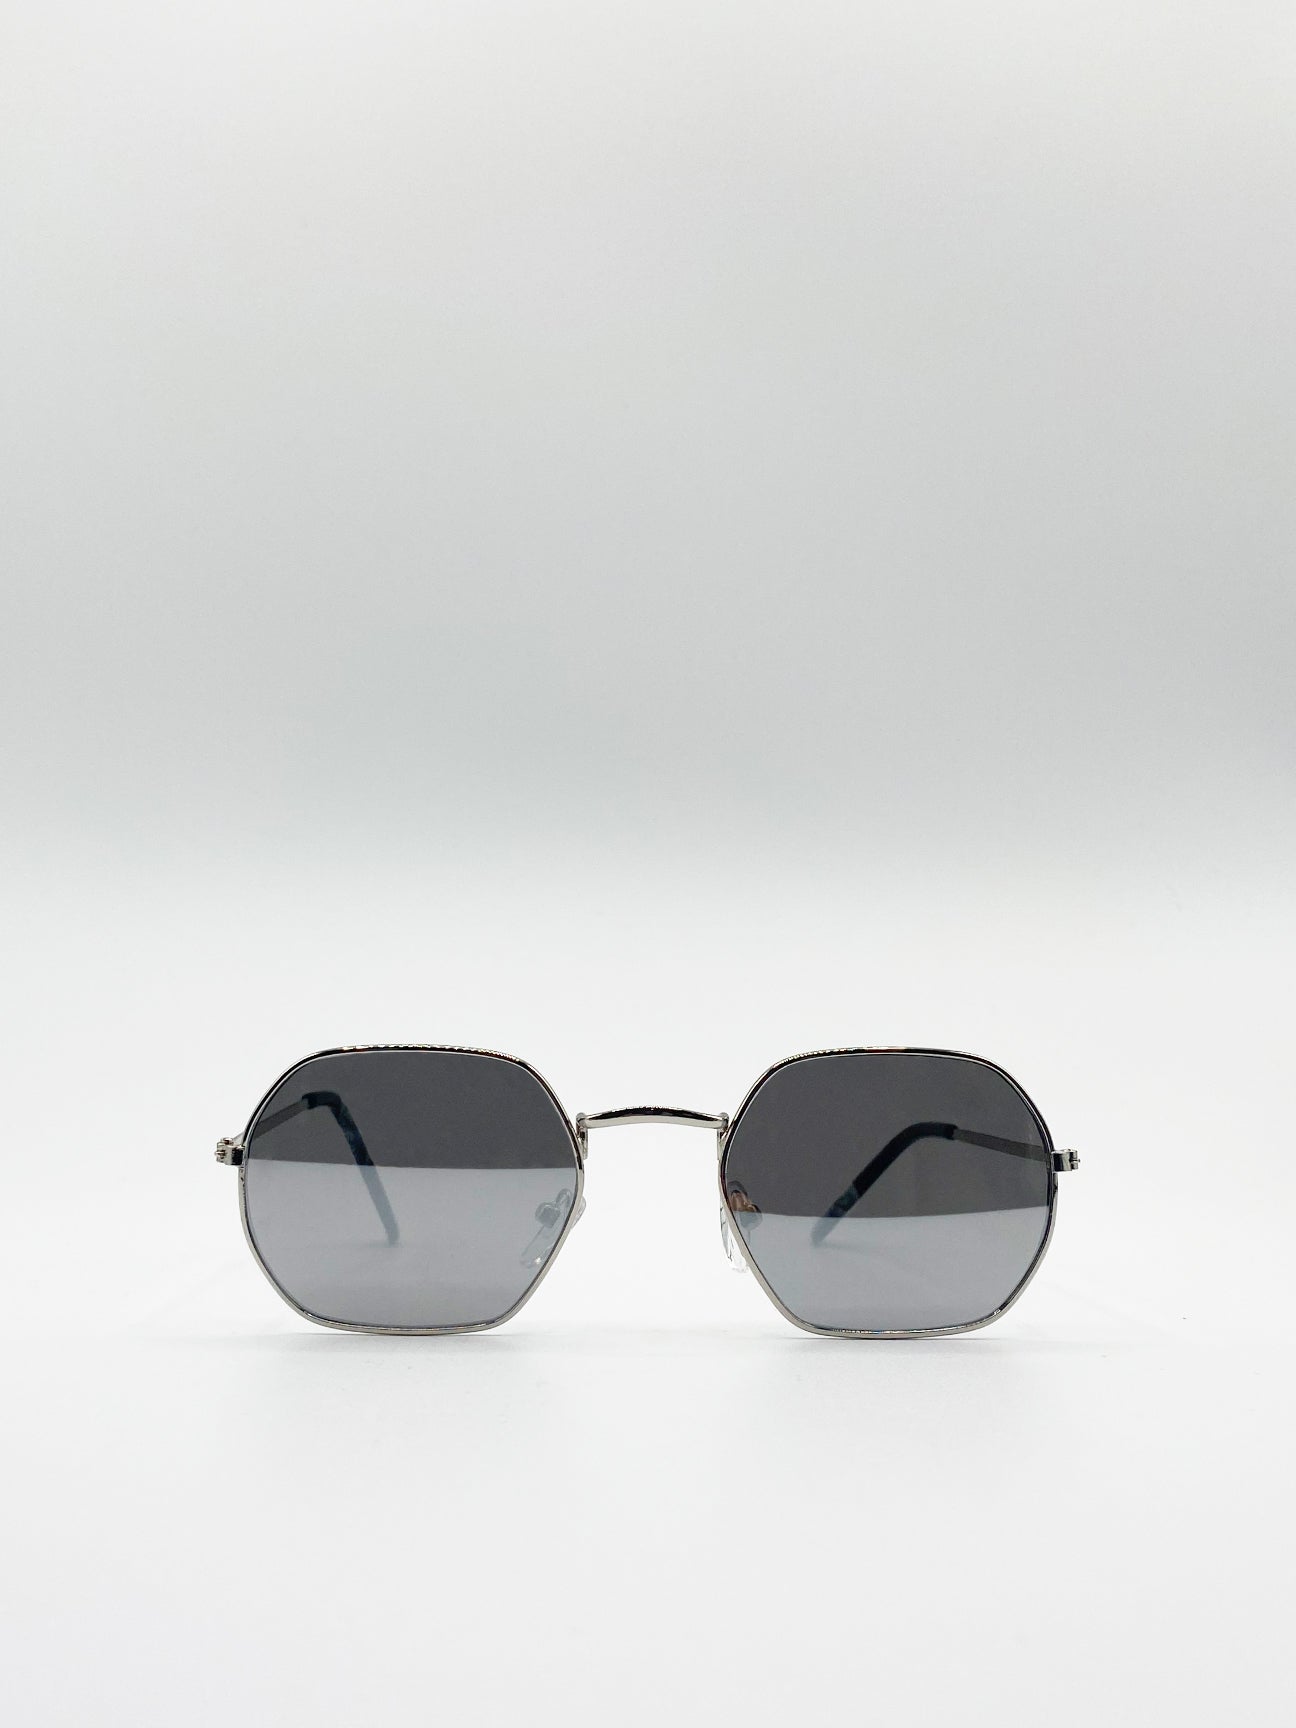 Hexagon Sunglasses Silver Frame with Silver Mirrored Lenses